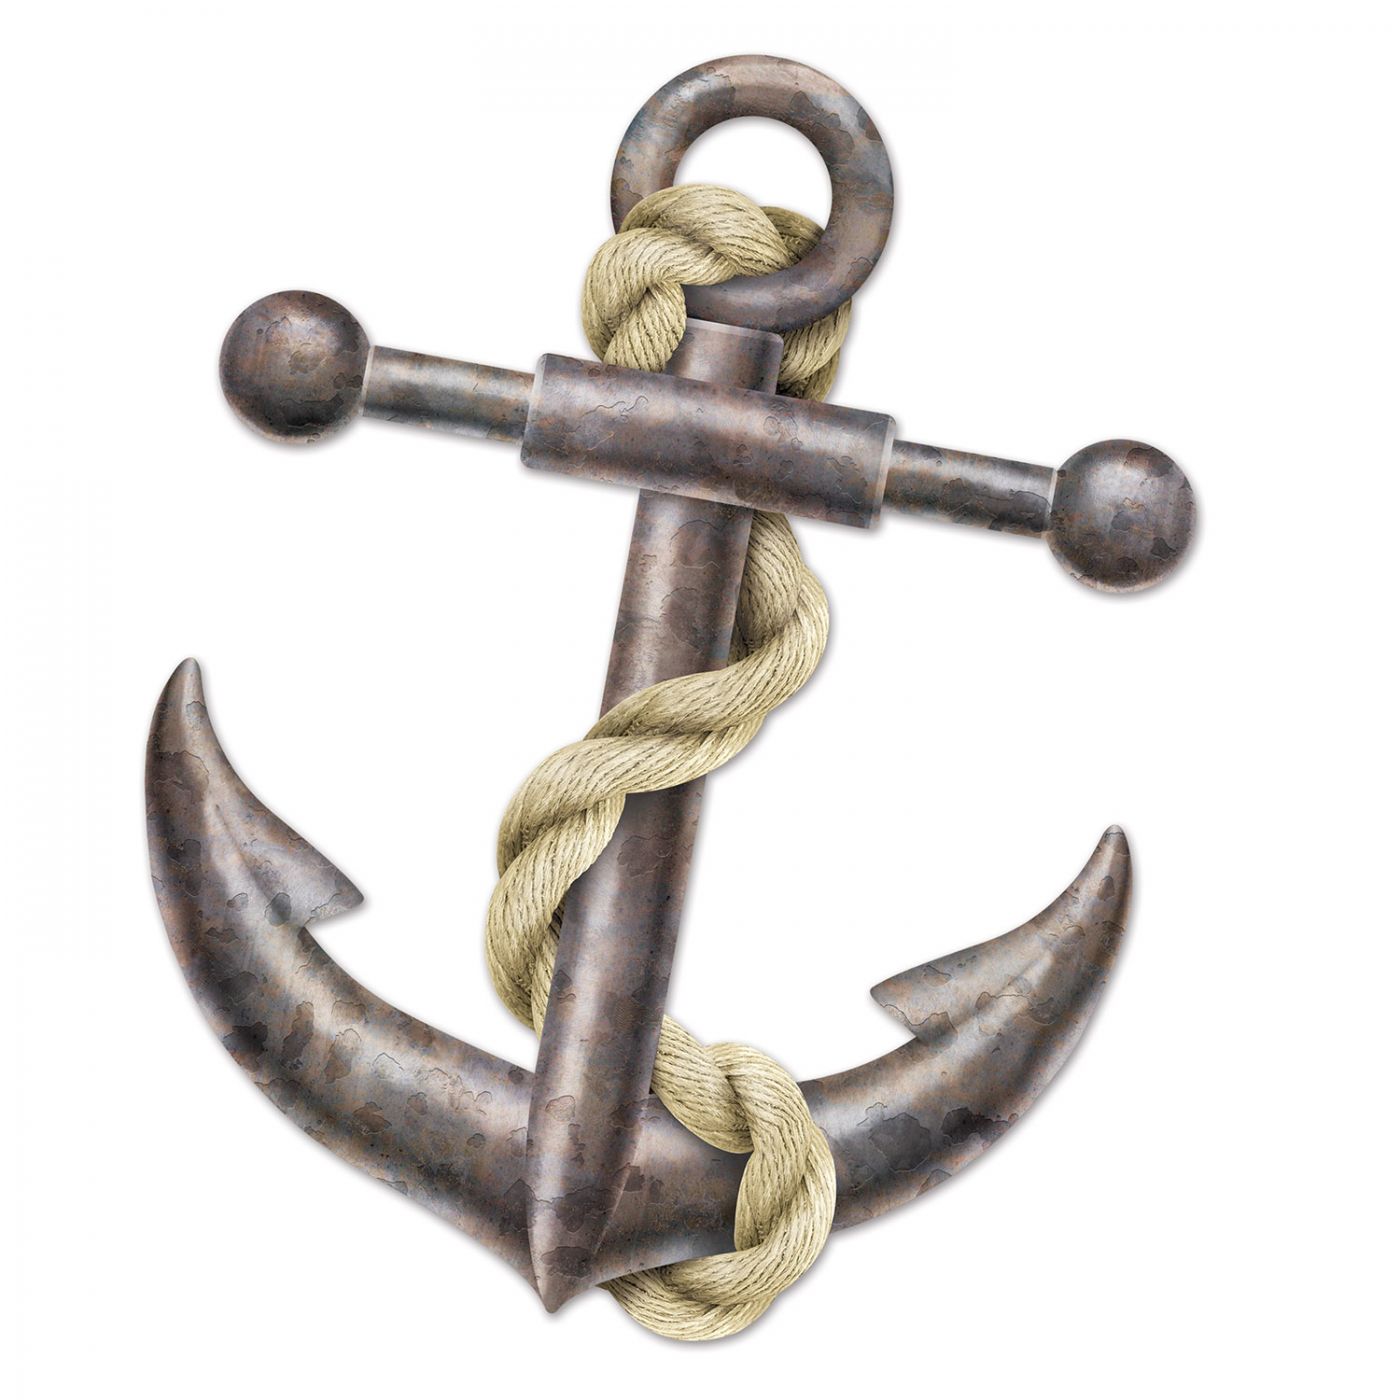 Jointed Anchor image